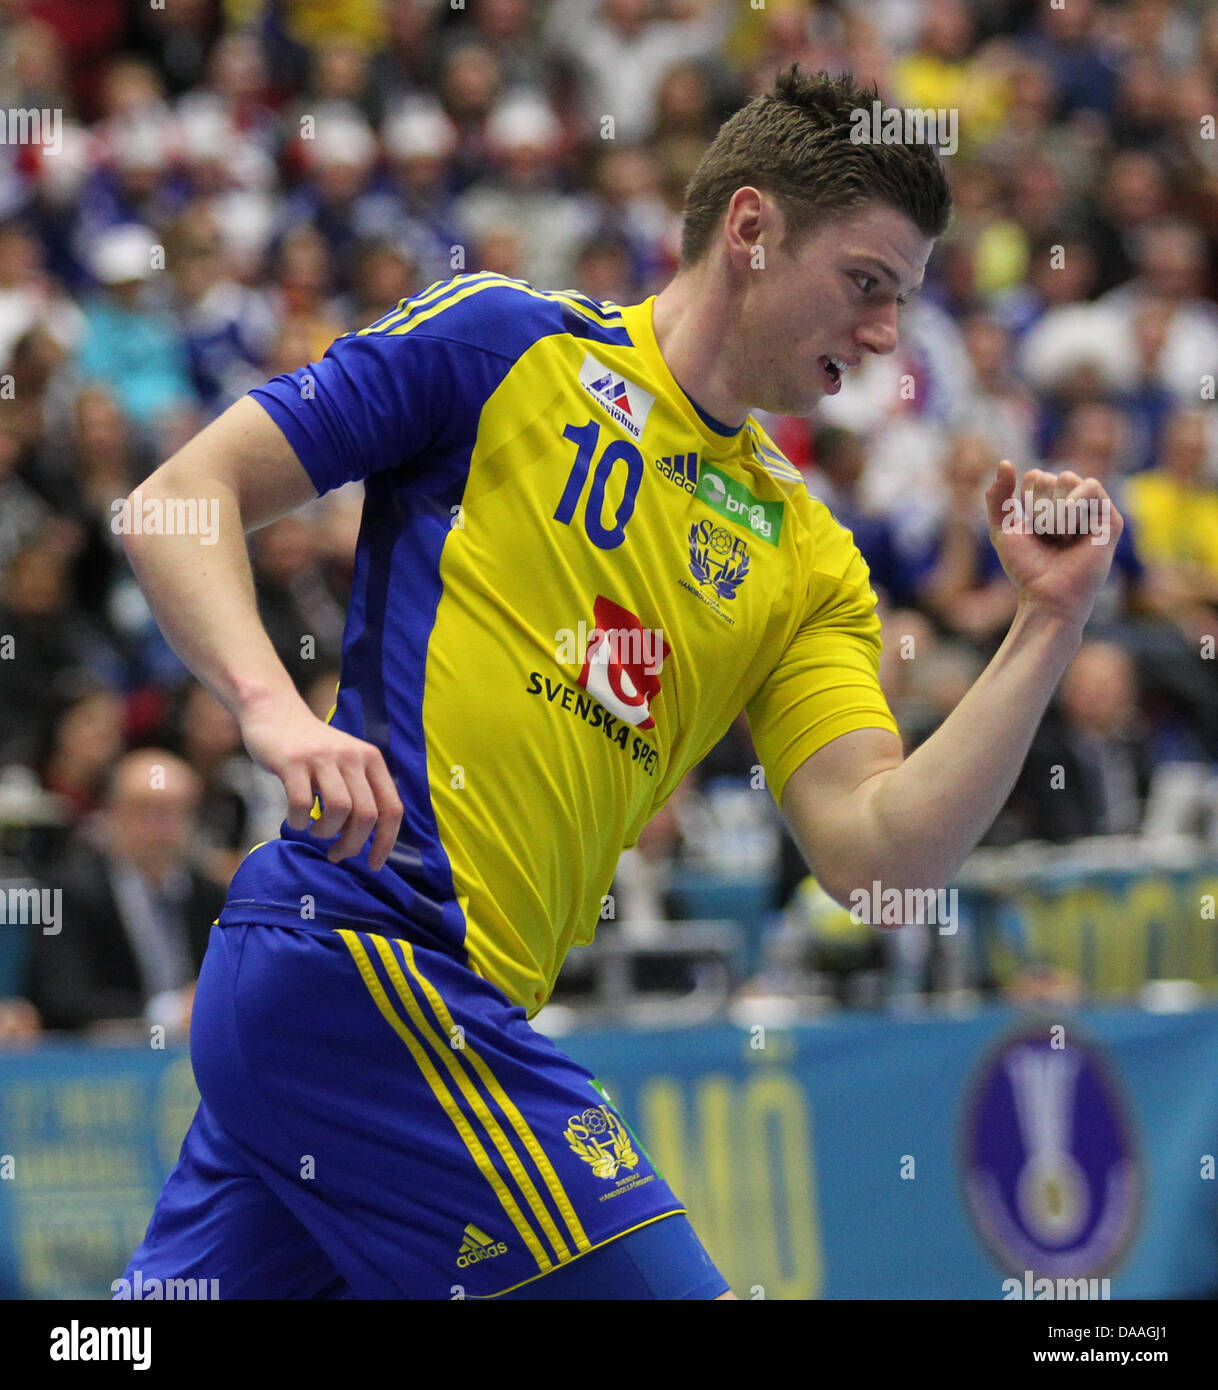 Niclas Ekberg of Sweden during the final of the Men's Handball World  Championship semi-final match France against Sweden in Malmo, Sweden, 28  January 2011. France clinched their fourth title defeating Denmark 37-35